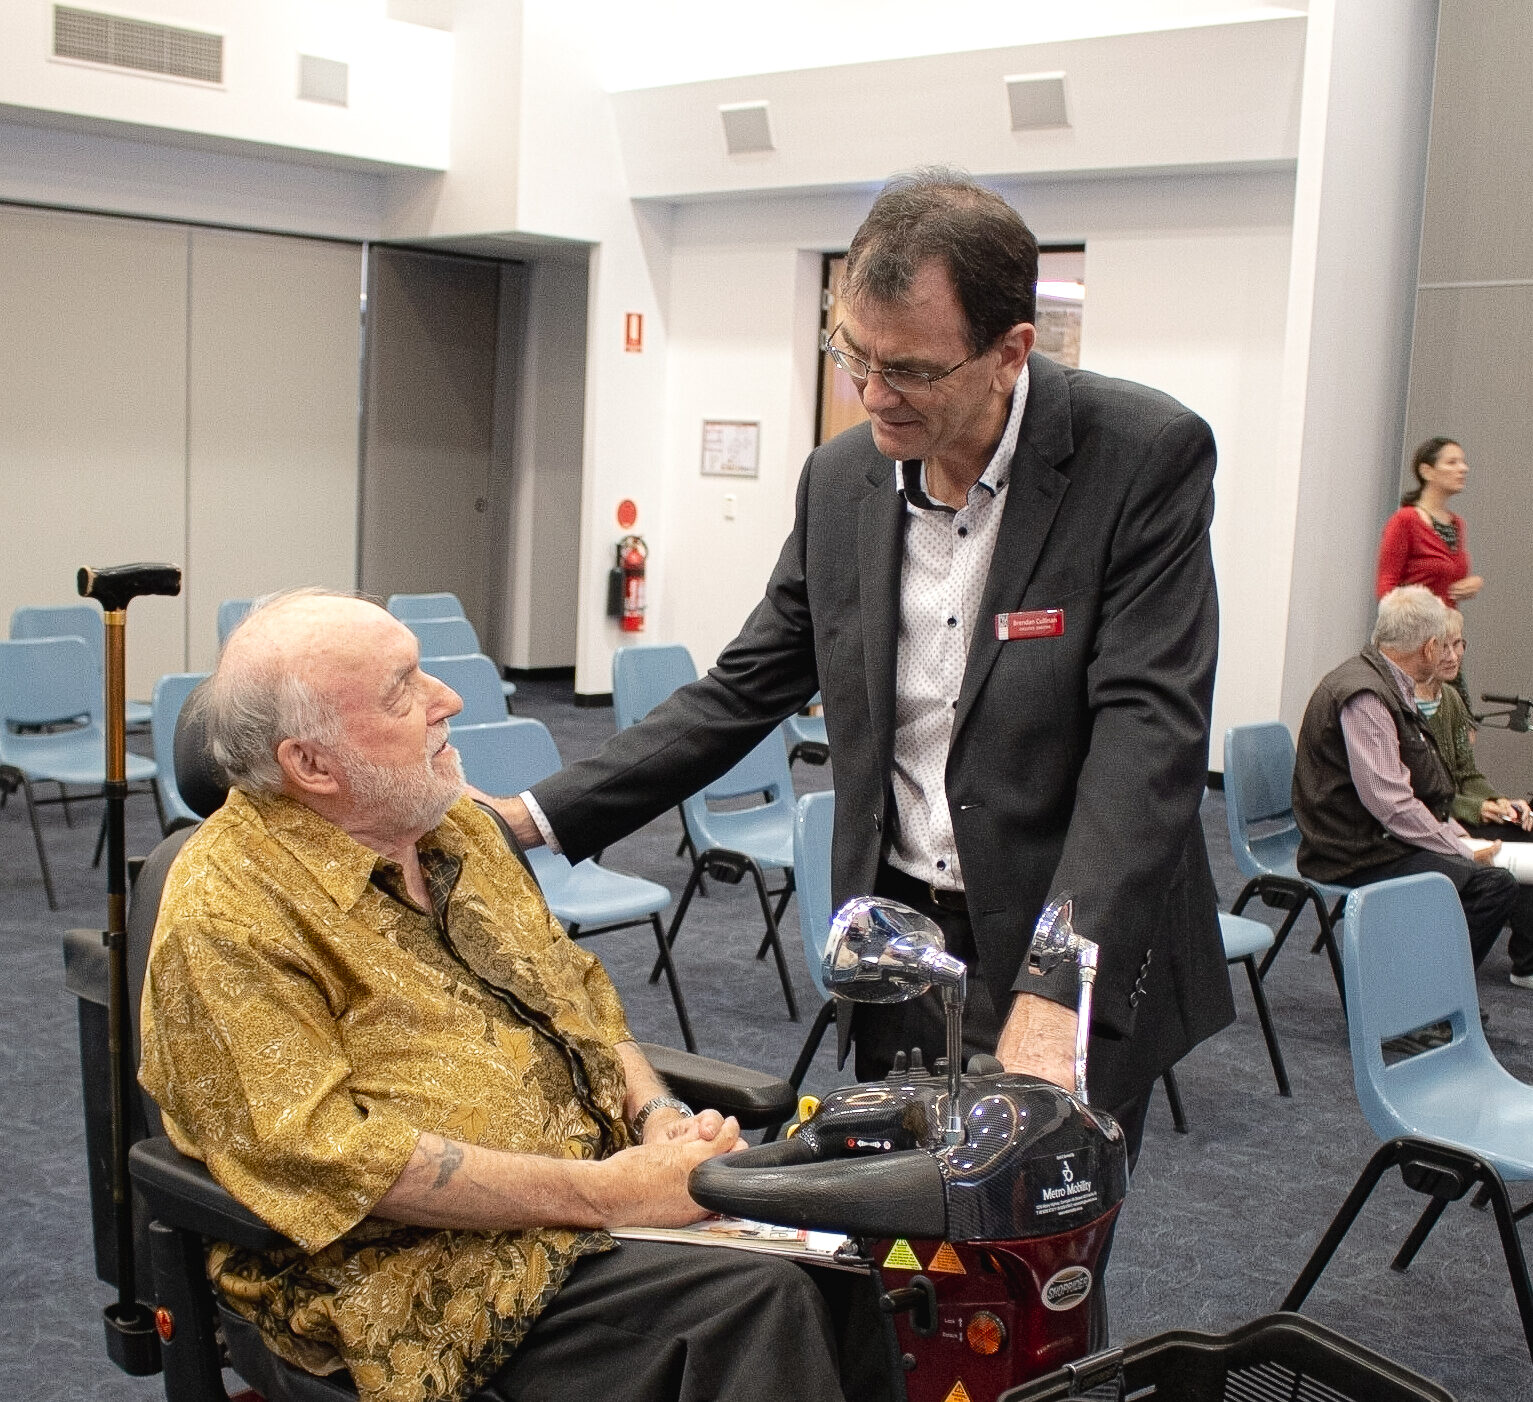 Chief Executive Officer, Brendan Cullinan speaking to a PWdWA member at a workshop.